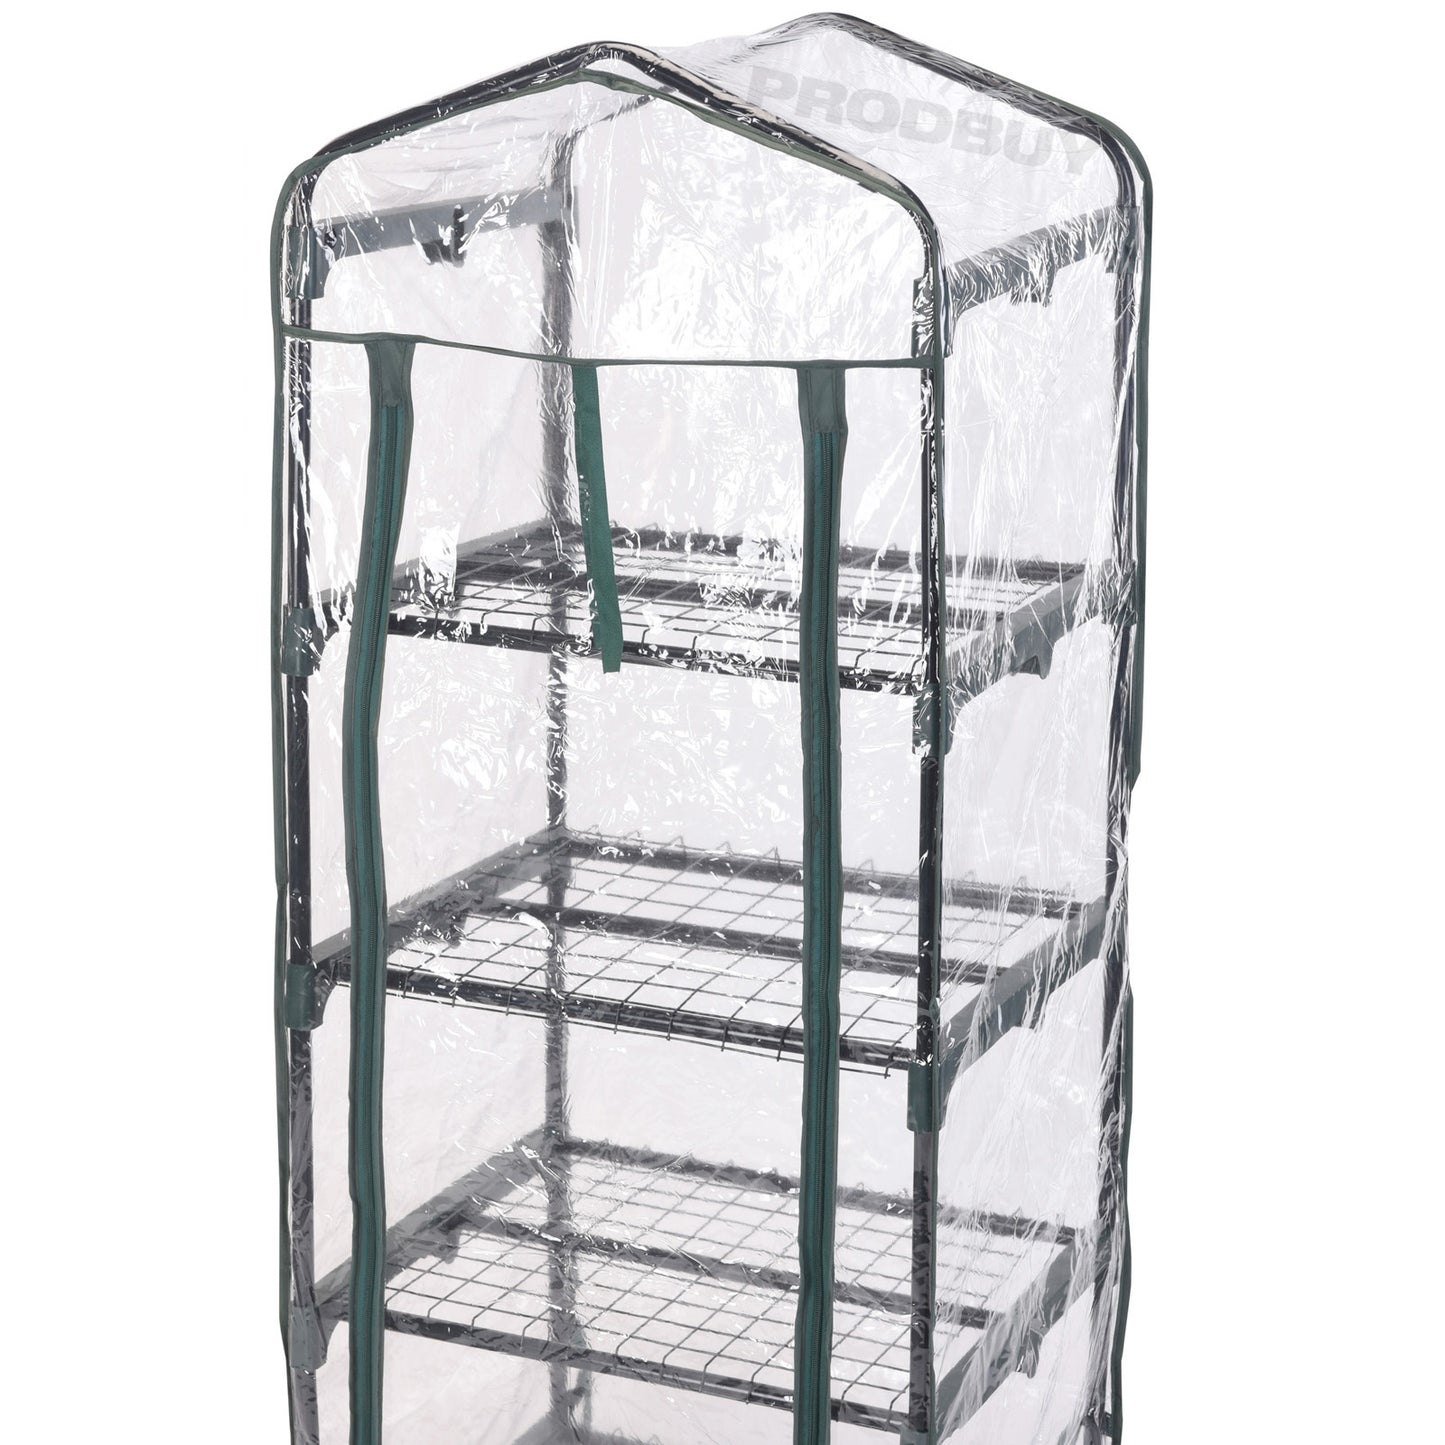 4 Tier Mini Greenhouse with Shelves Outdoor Garden PVC Plastic Cover Plant House